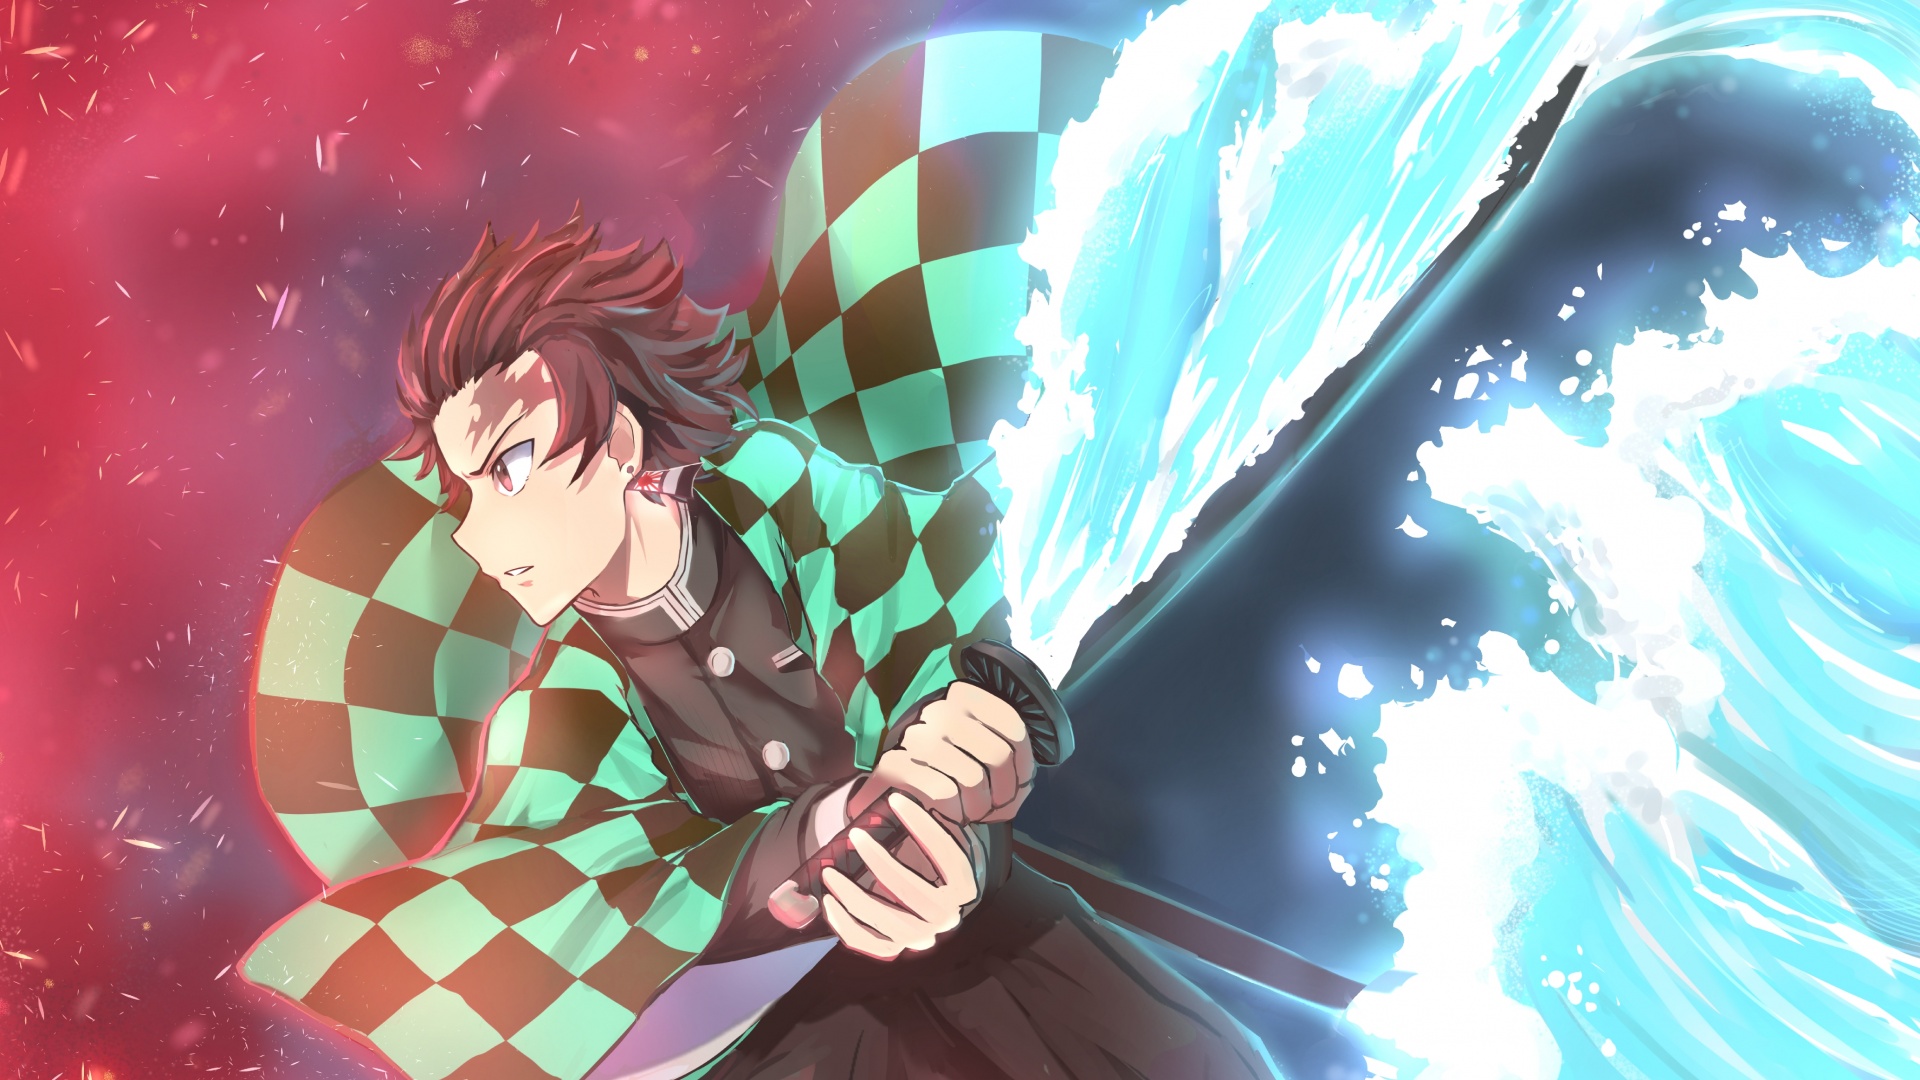 Demon Slayer Tanjiro Kamado With Sword With Blue Background 4K 8K HD Anime  Wallpapers, HD Wallpapers